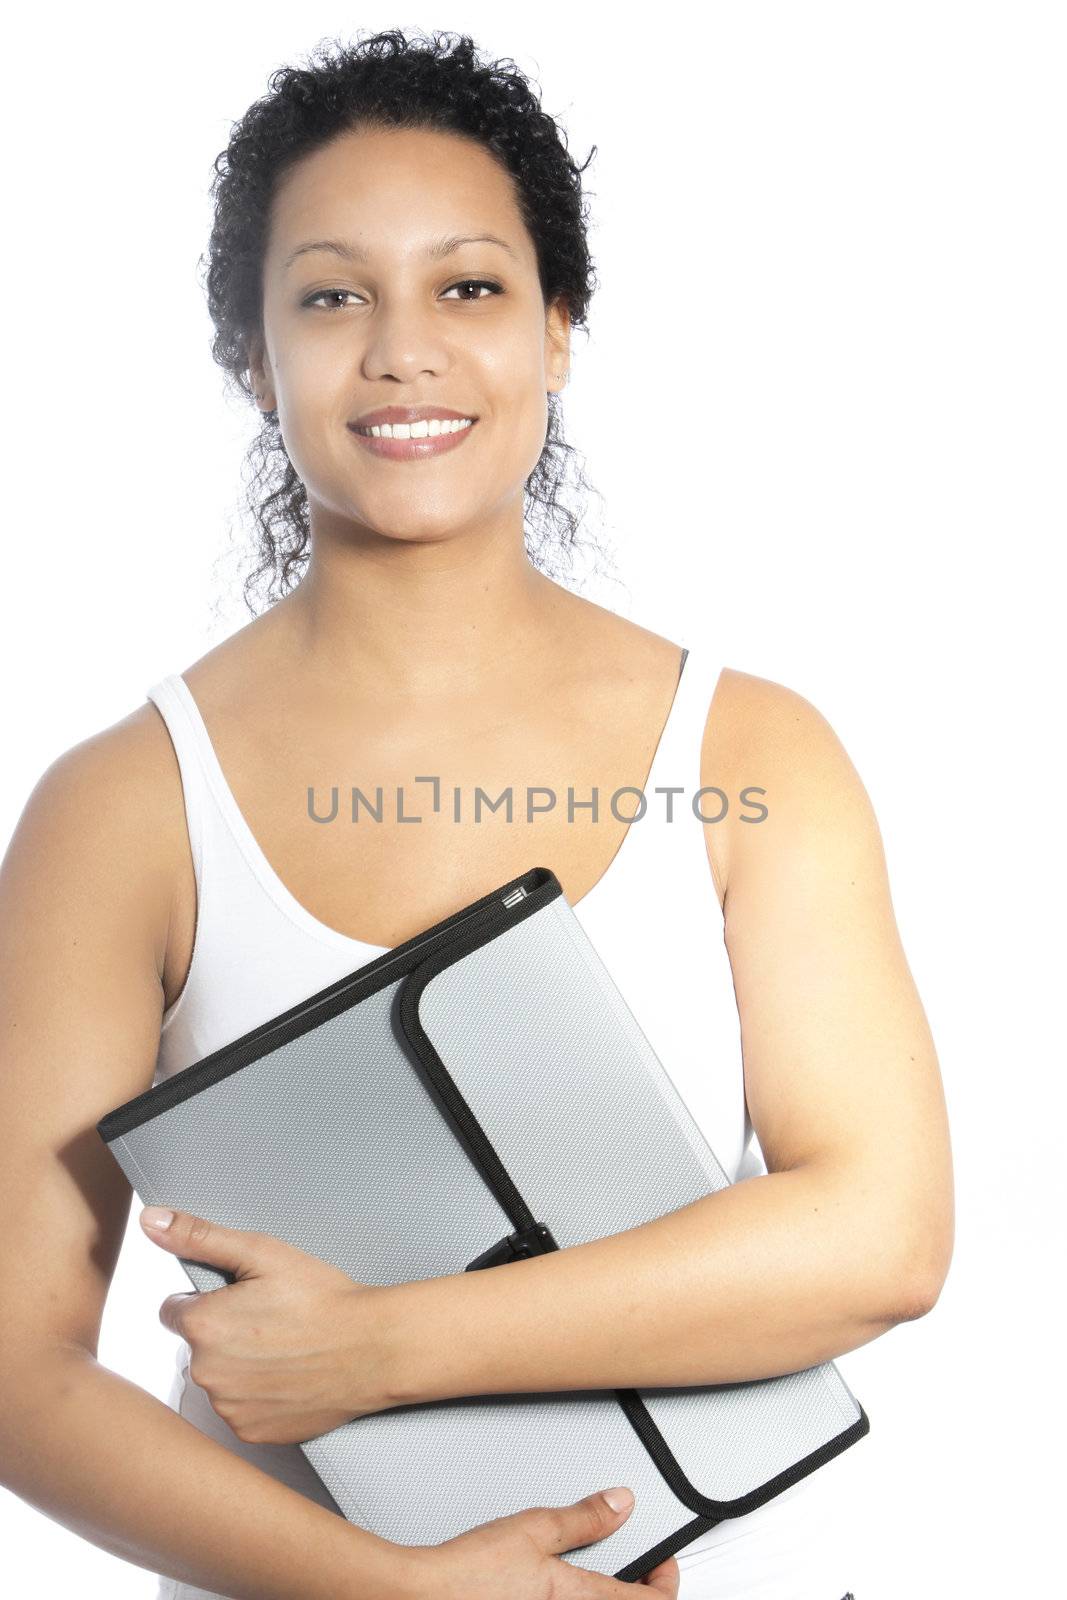 Beautiful young female African American graduate student or business woman holding a stylish folder in her arms as she smiles at the camera isolated on white